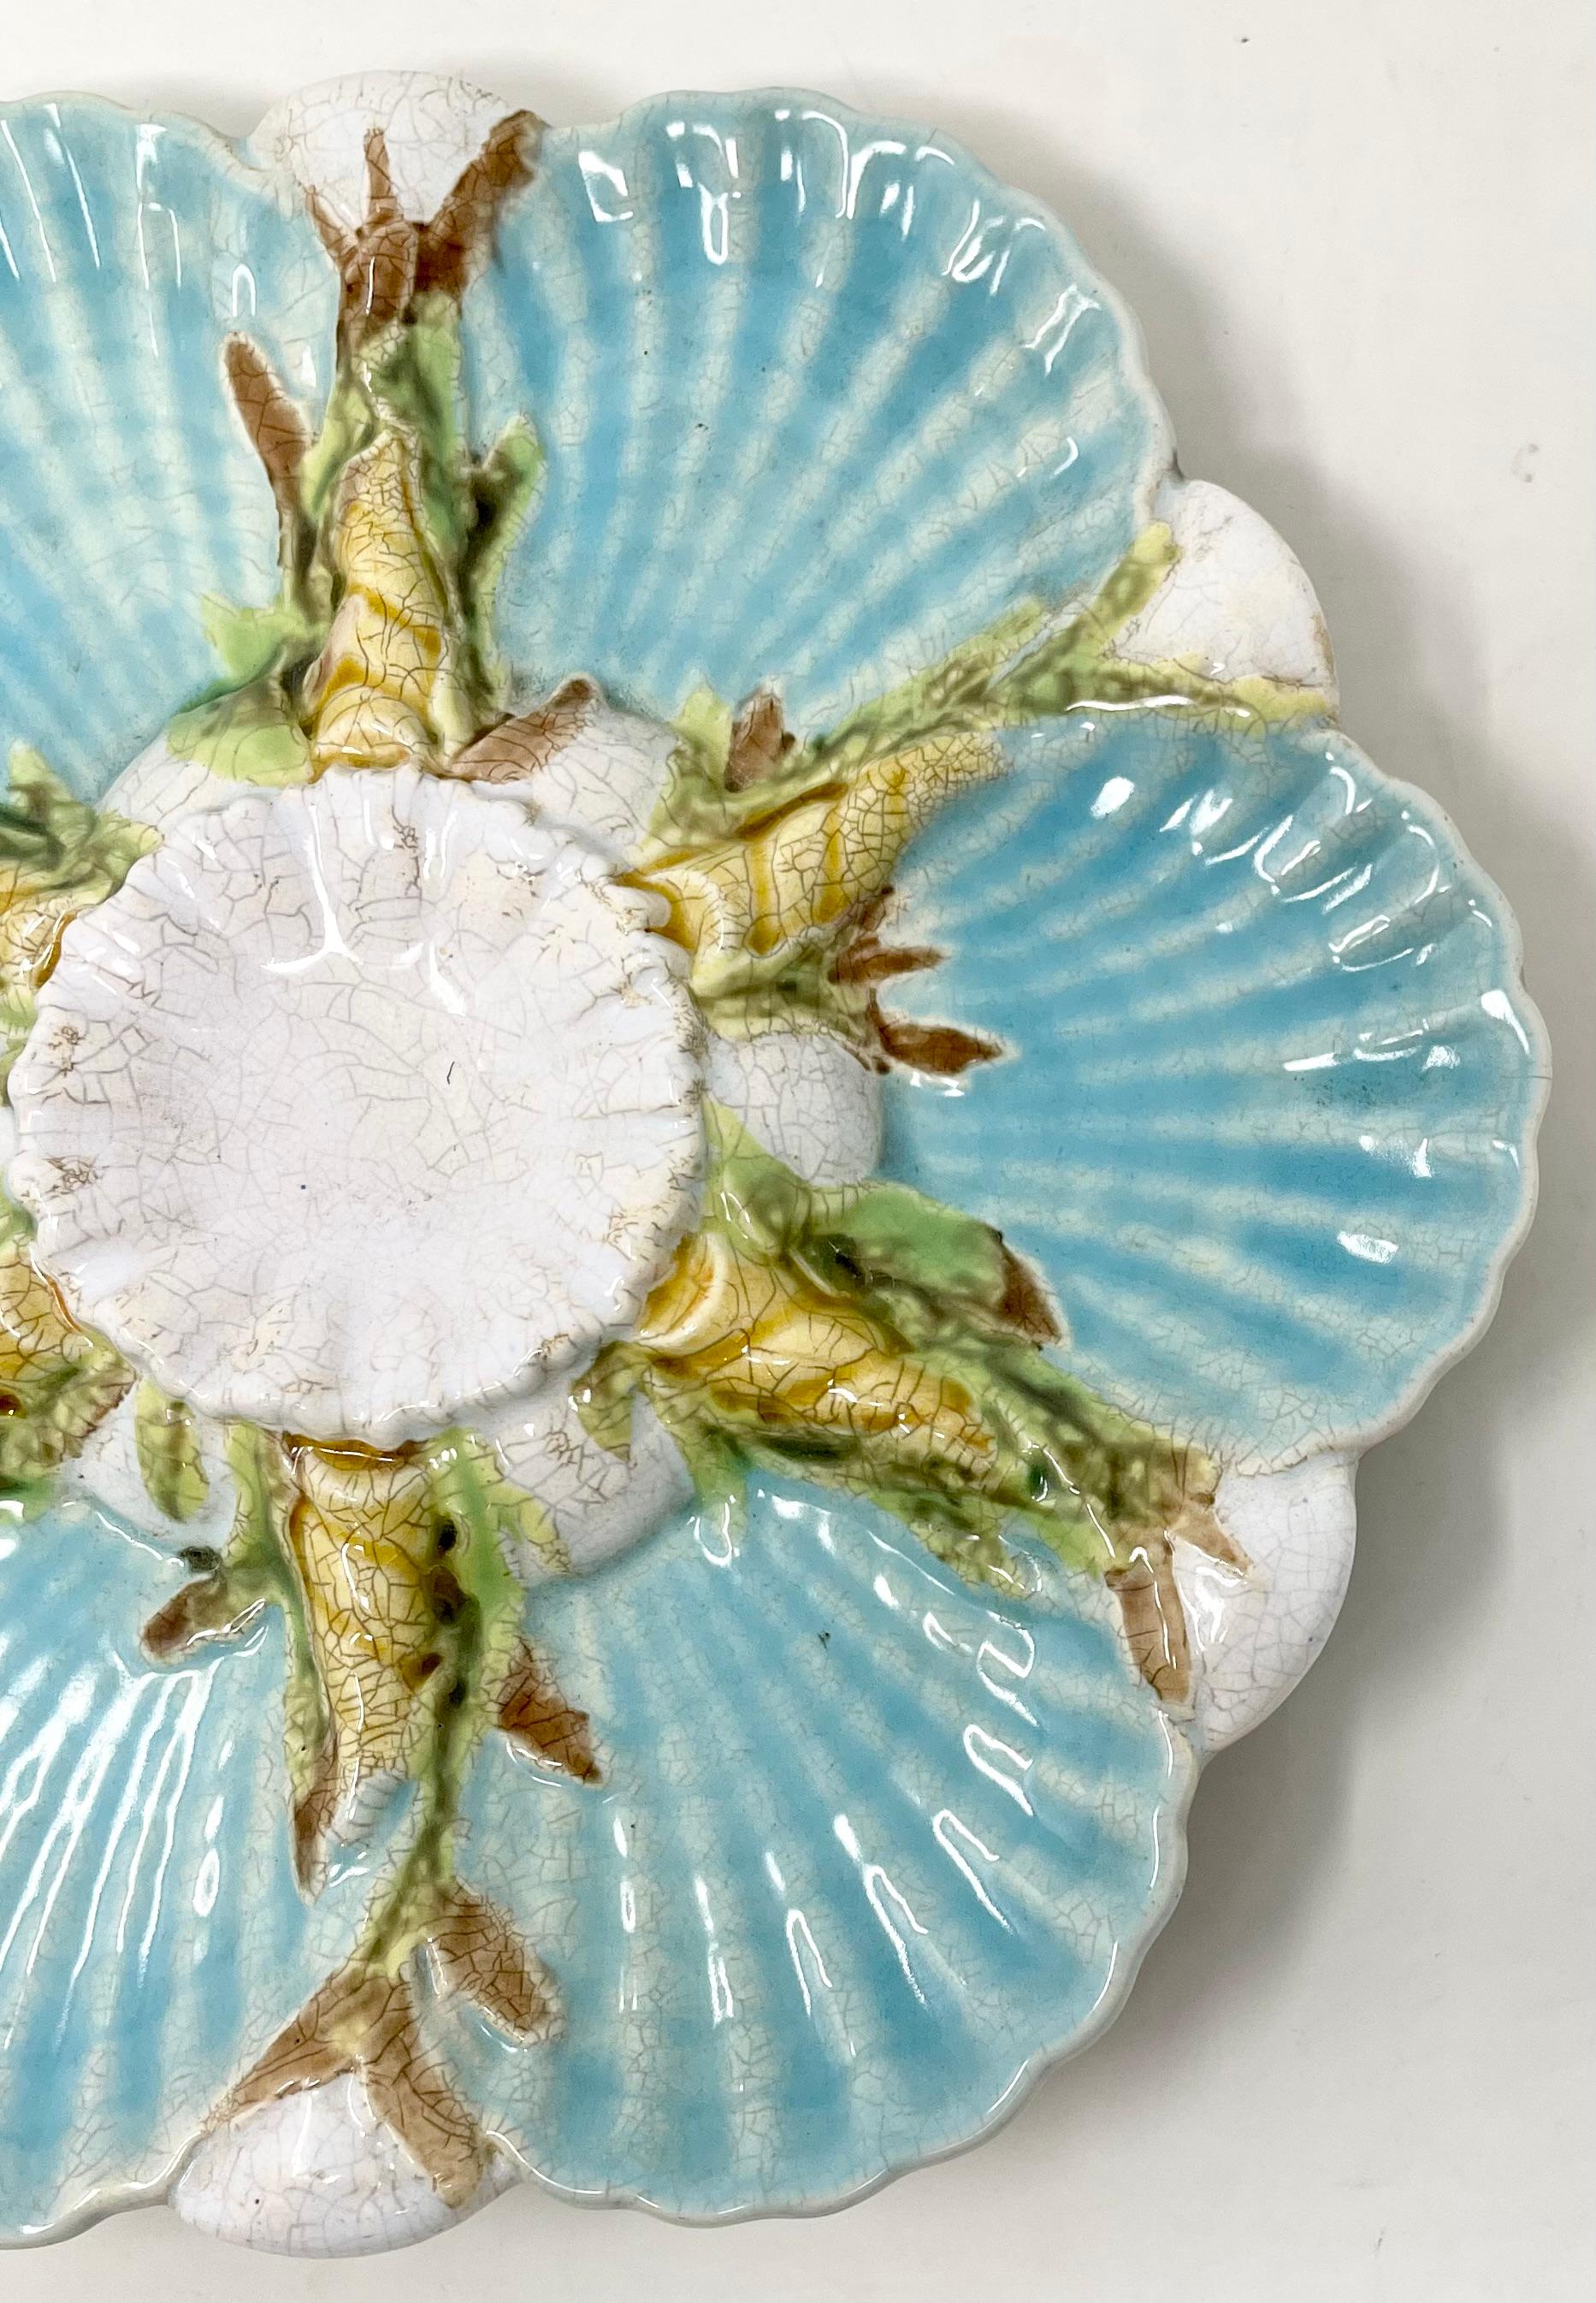 Rare antique English Majolica porcelain oyster plate, signed 